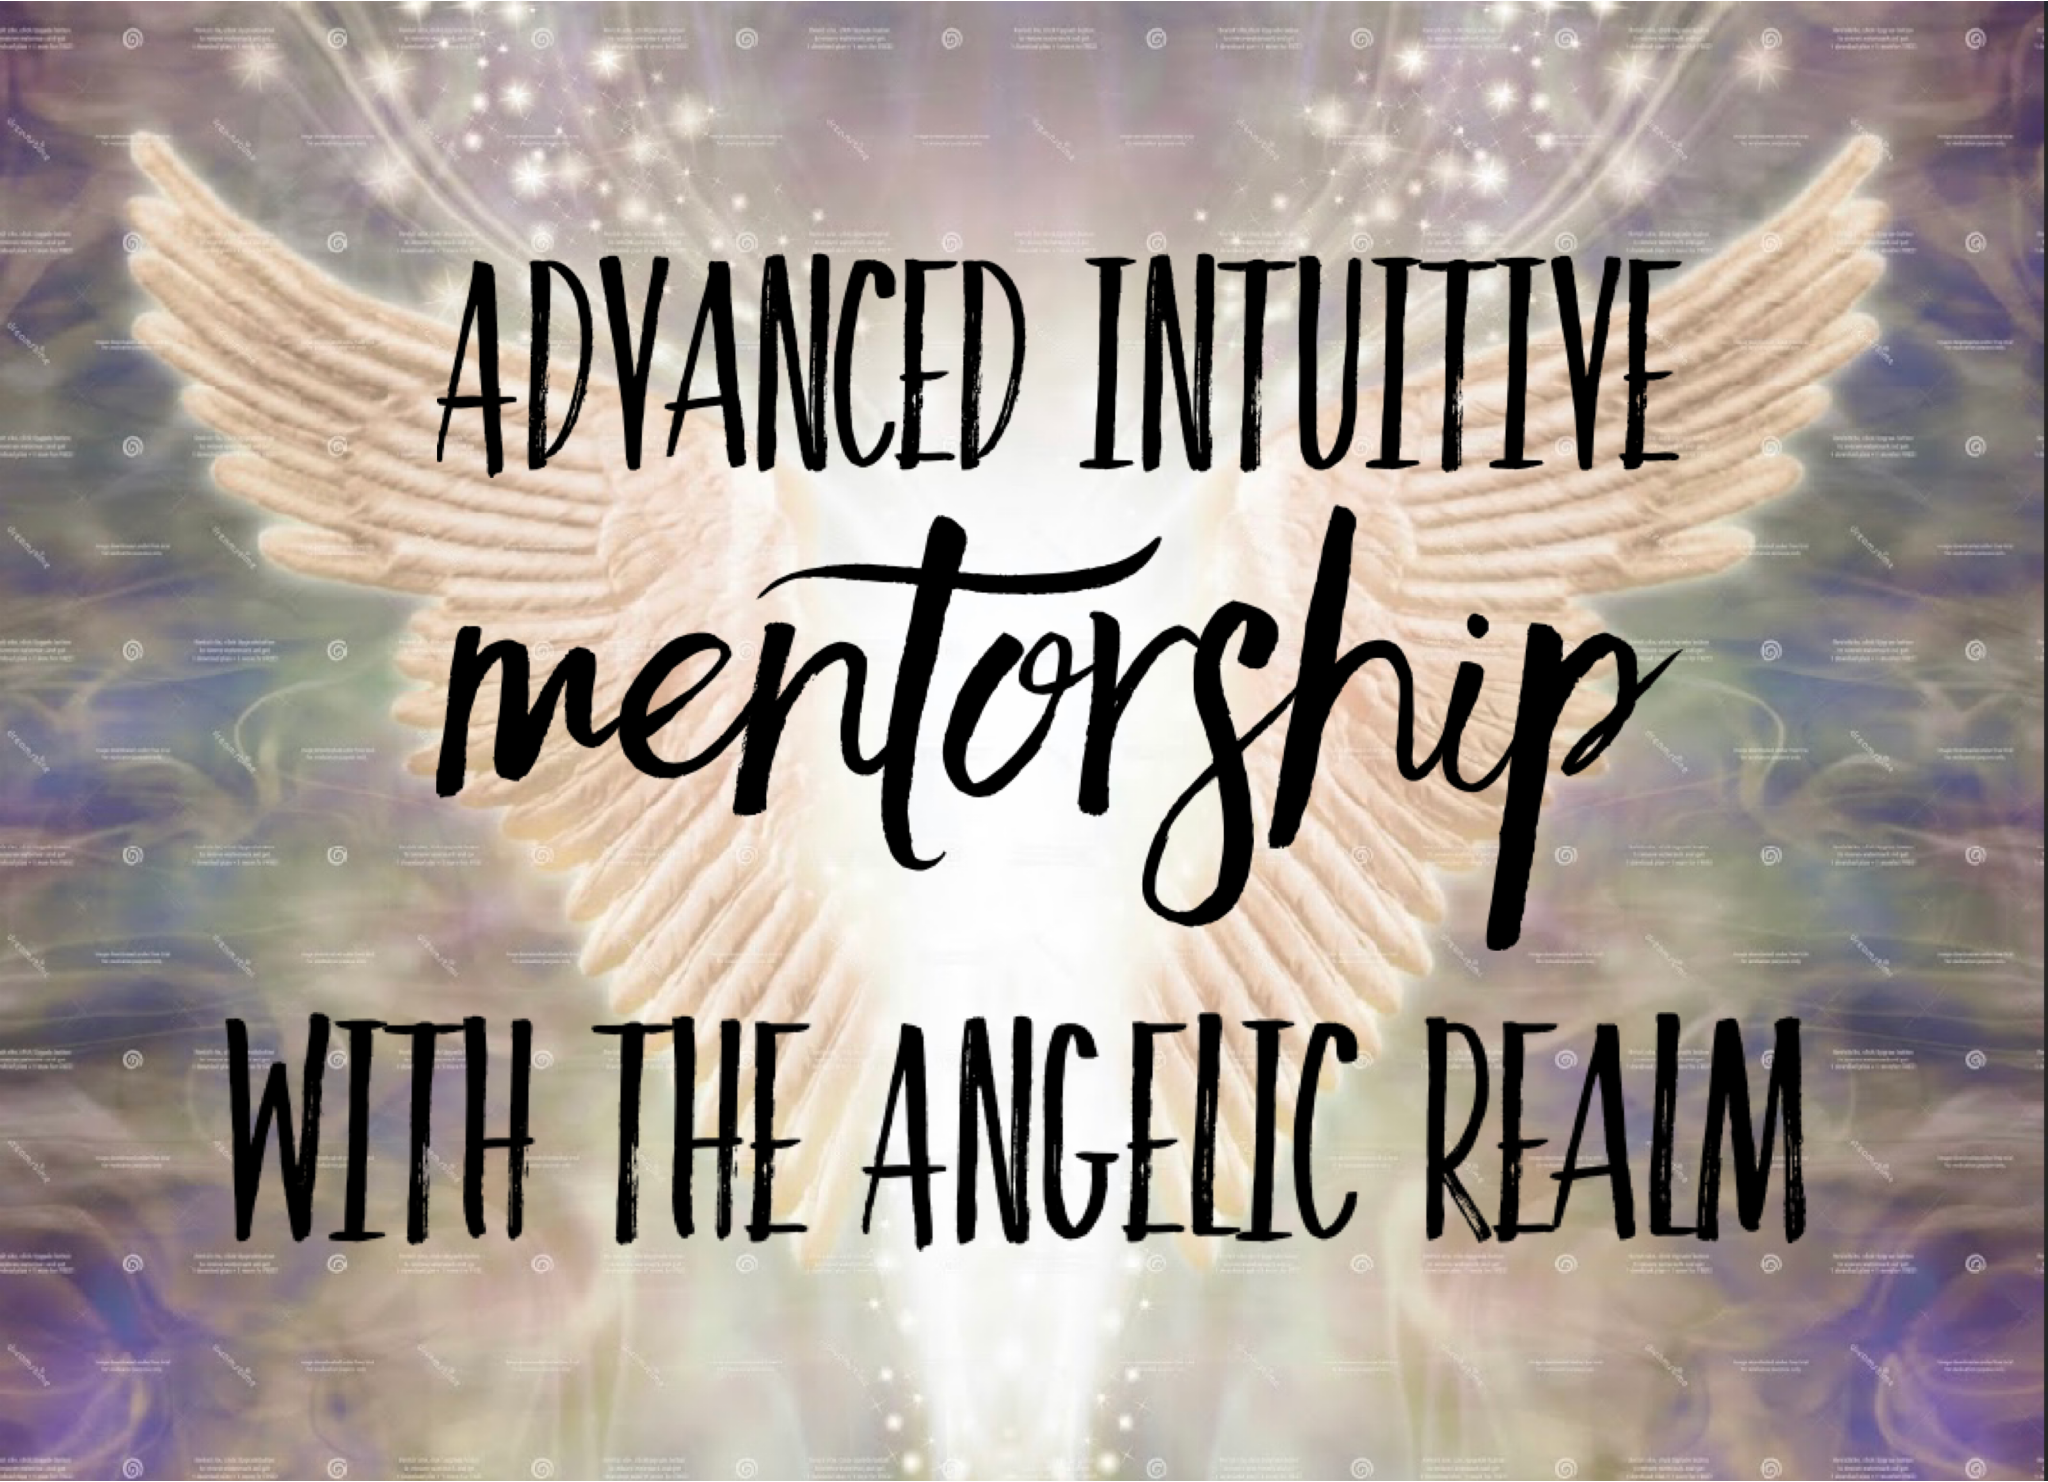 A picture of an angel with text that says advanced intuitive mentorship with the angelic realm.